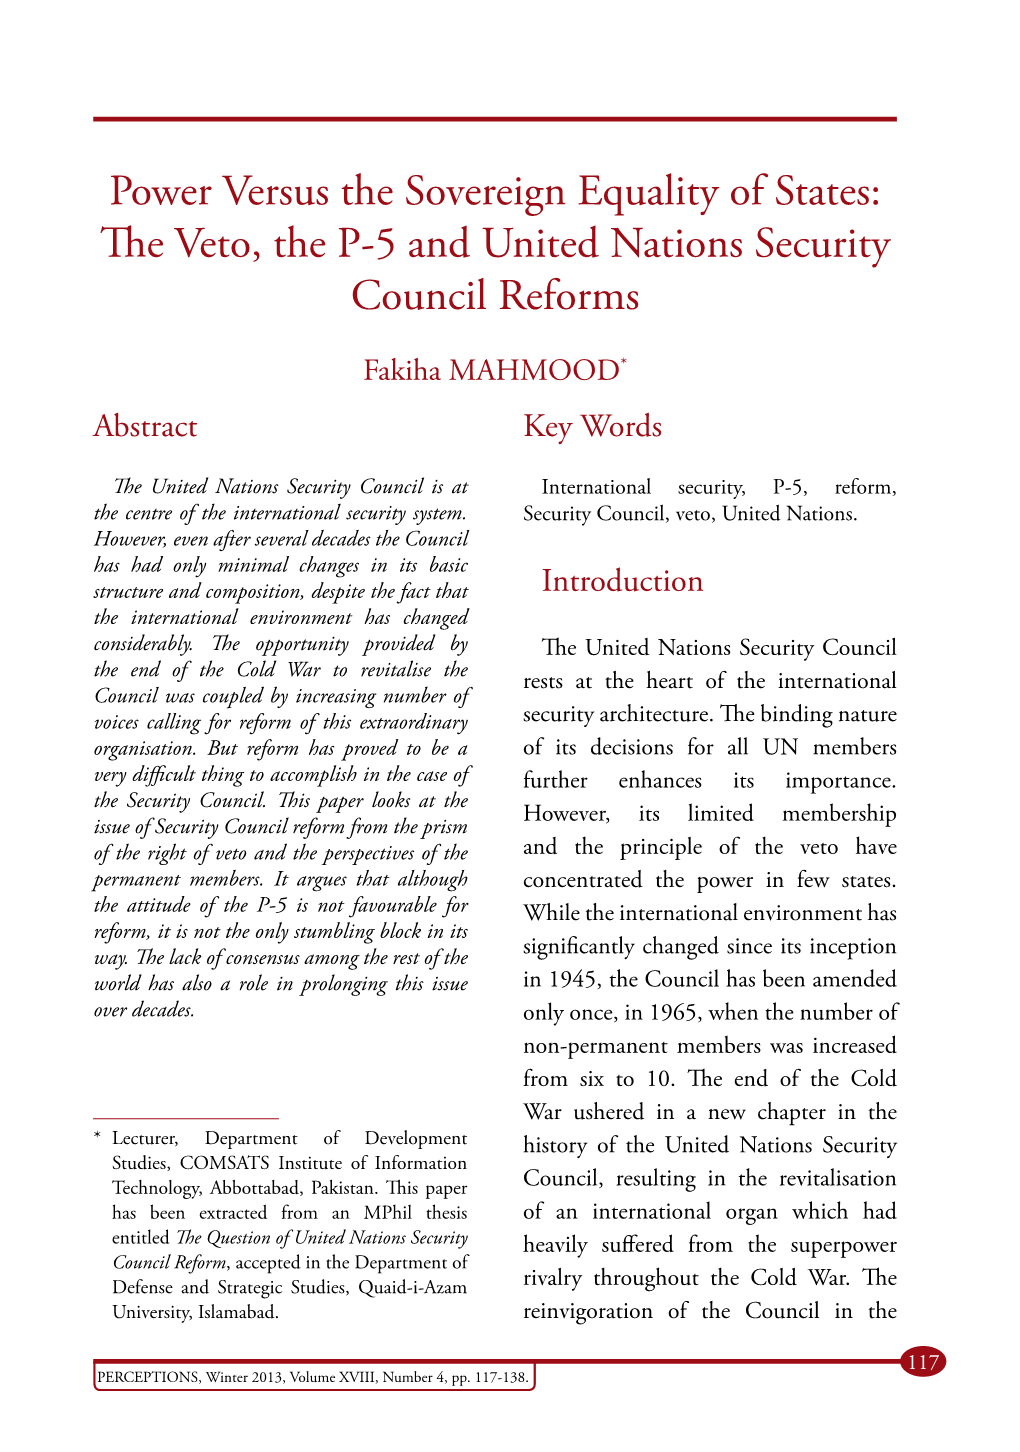 The Veto, the P-5 and United Nations Security Council Reforms